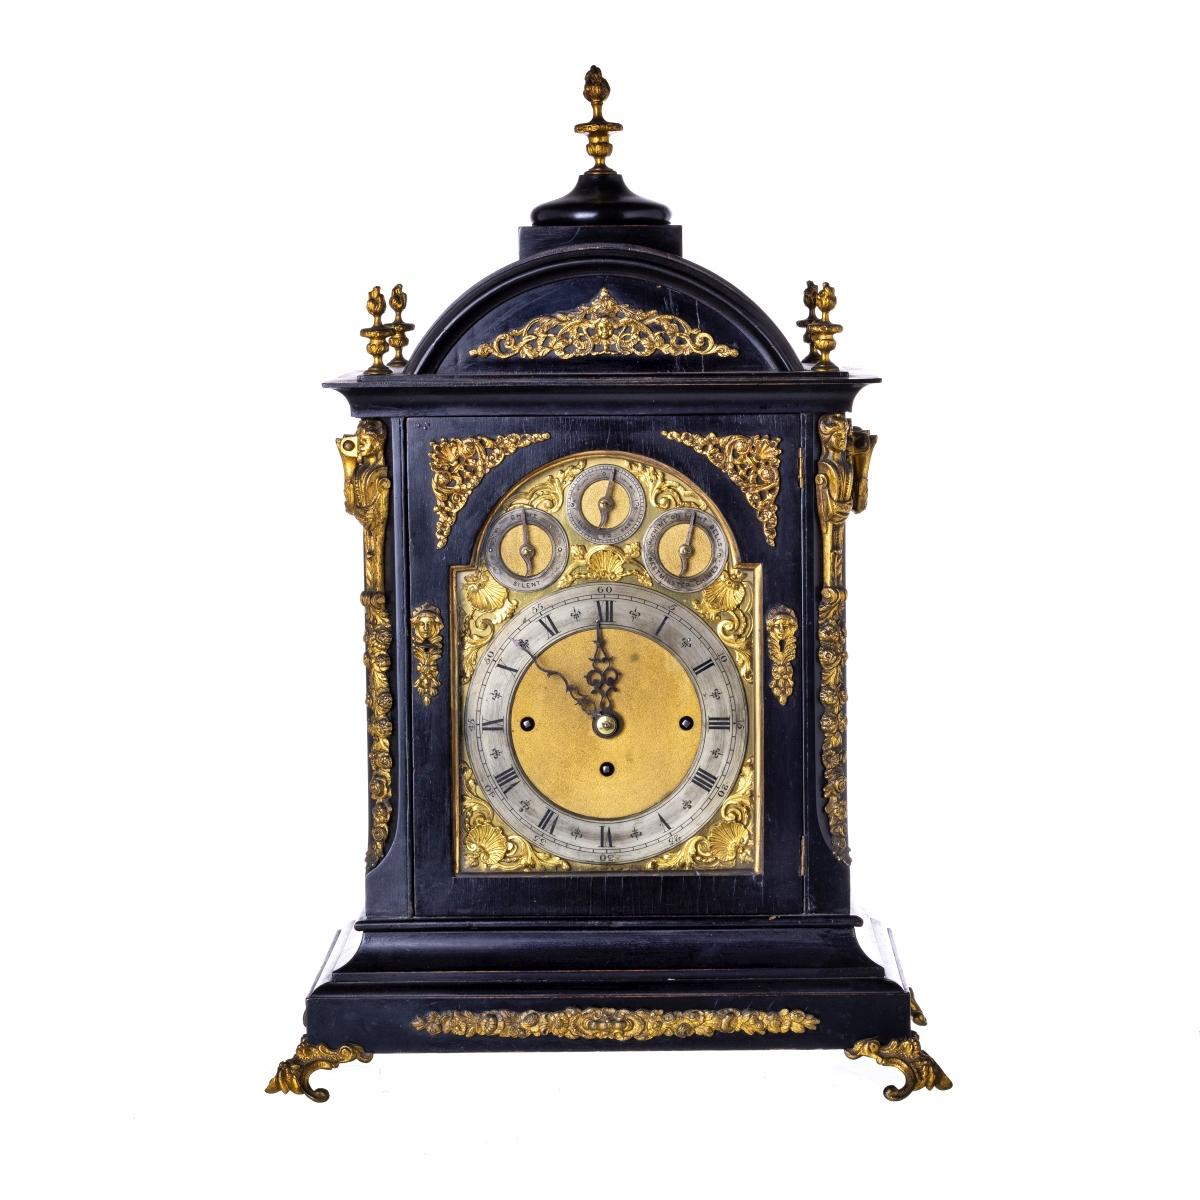 ENGLISH TABLE CLOCK
19th Century
George III style. 
Ebonized wood box, with embossed, pierced and gilt brass friezes and applications 